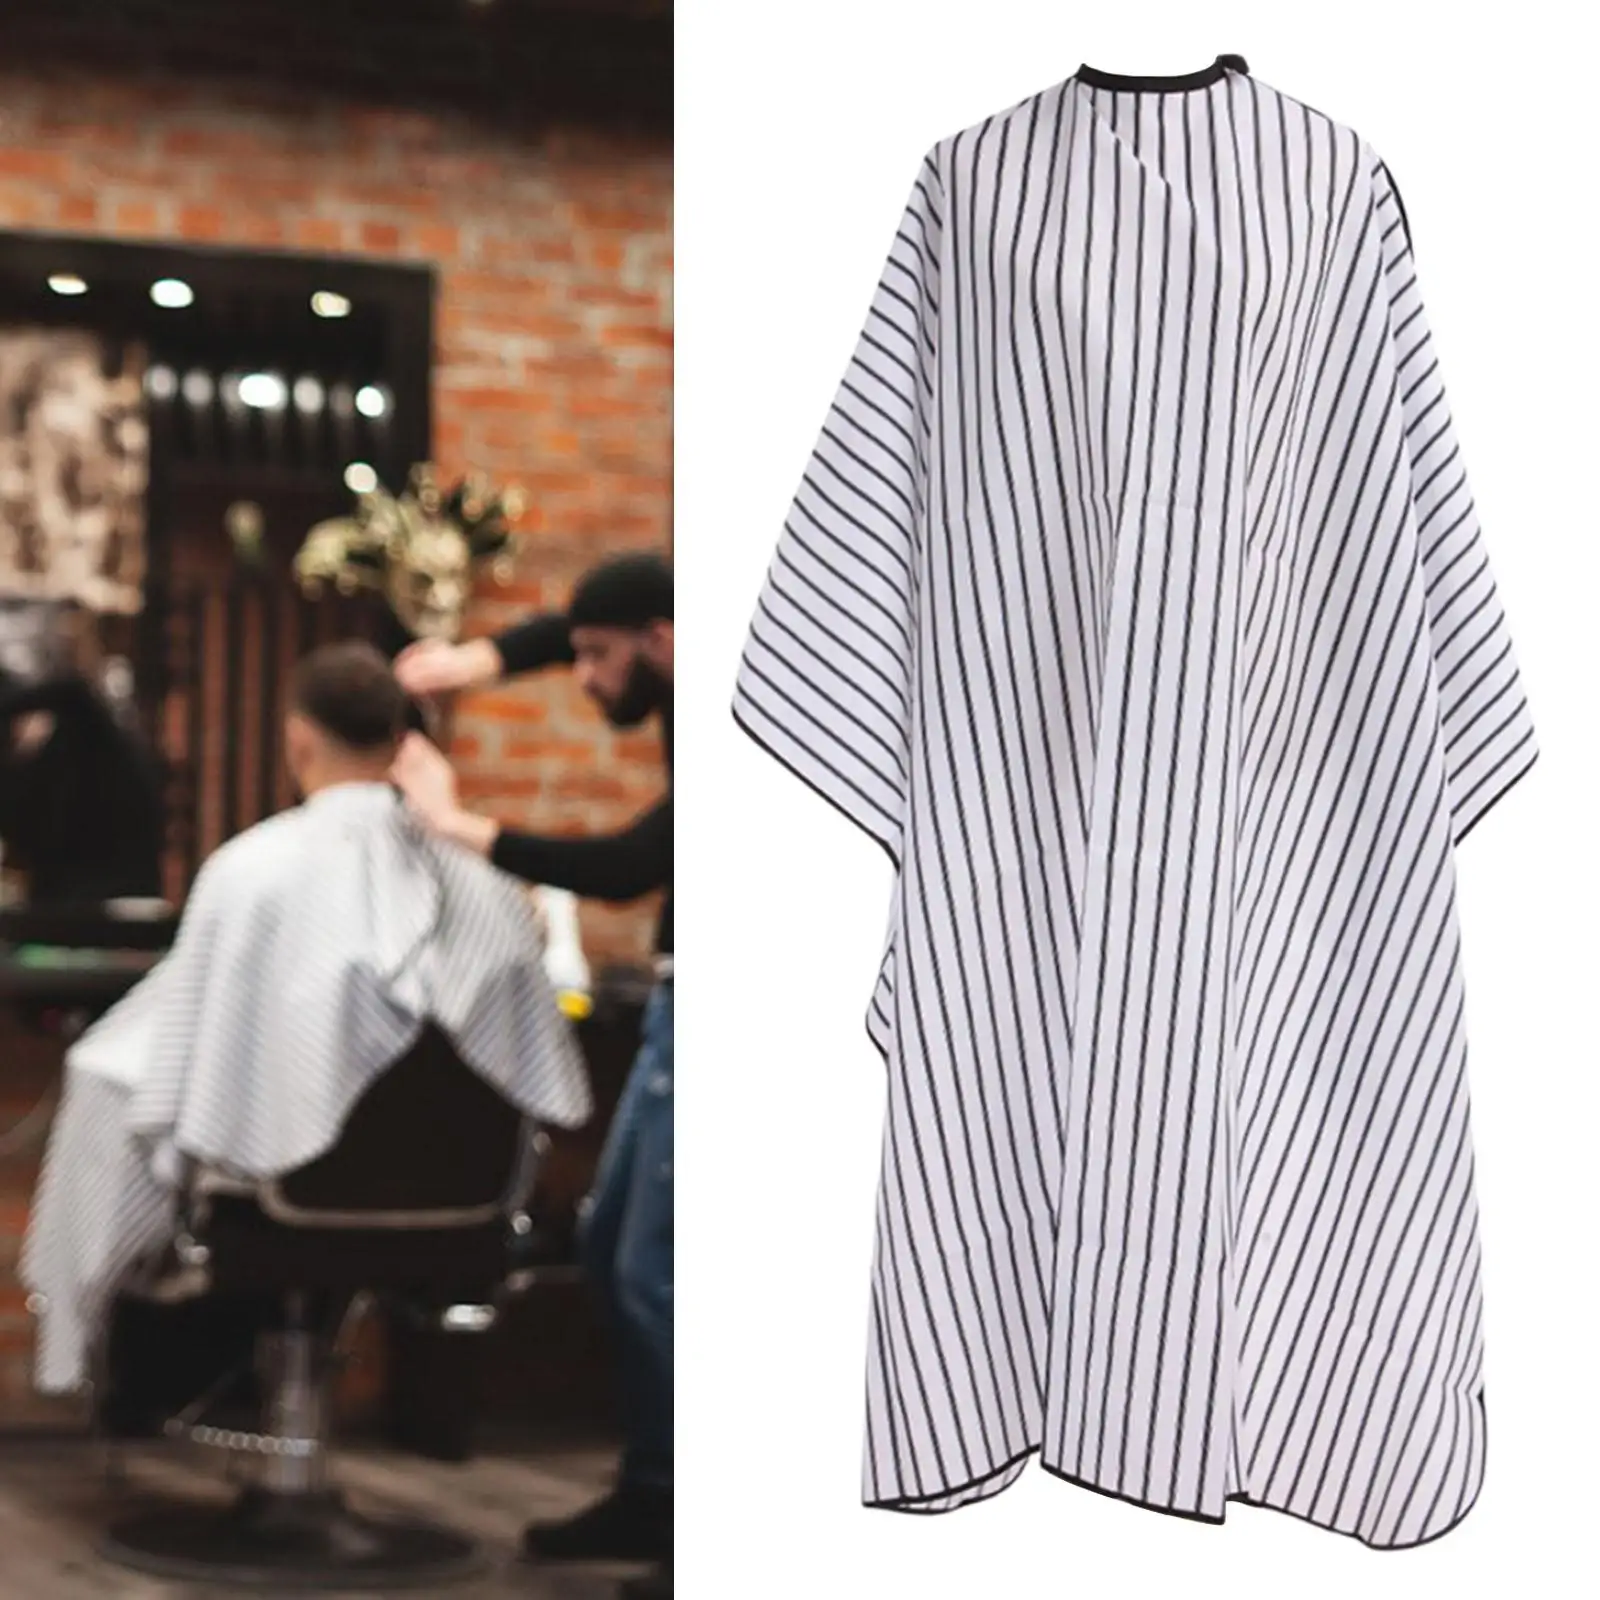 Hair Cutting Cape Stripe Pattern for Hairdresser Salon Hairdressing Gown